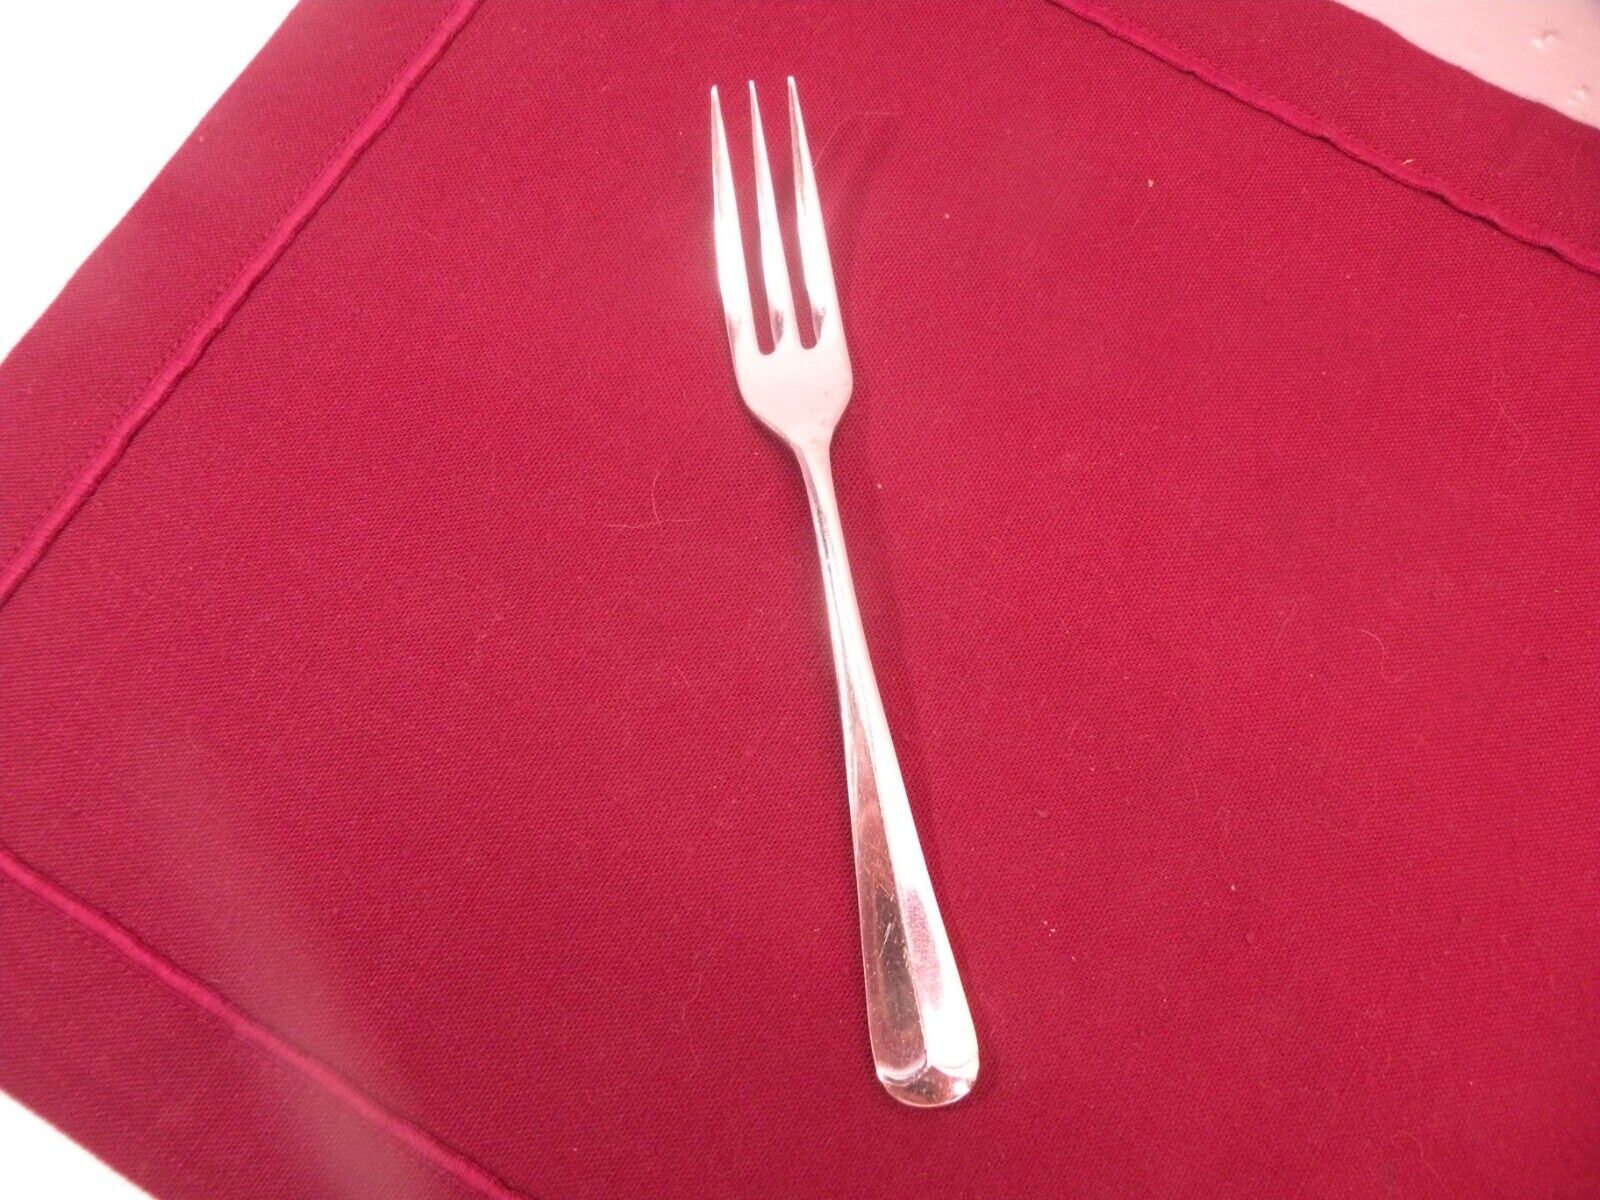 1 Towle Georgian House American Antique Stainless 18-8 Salad Fork 6 3/4